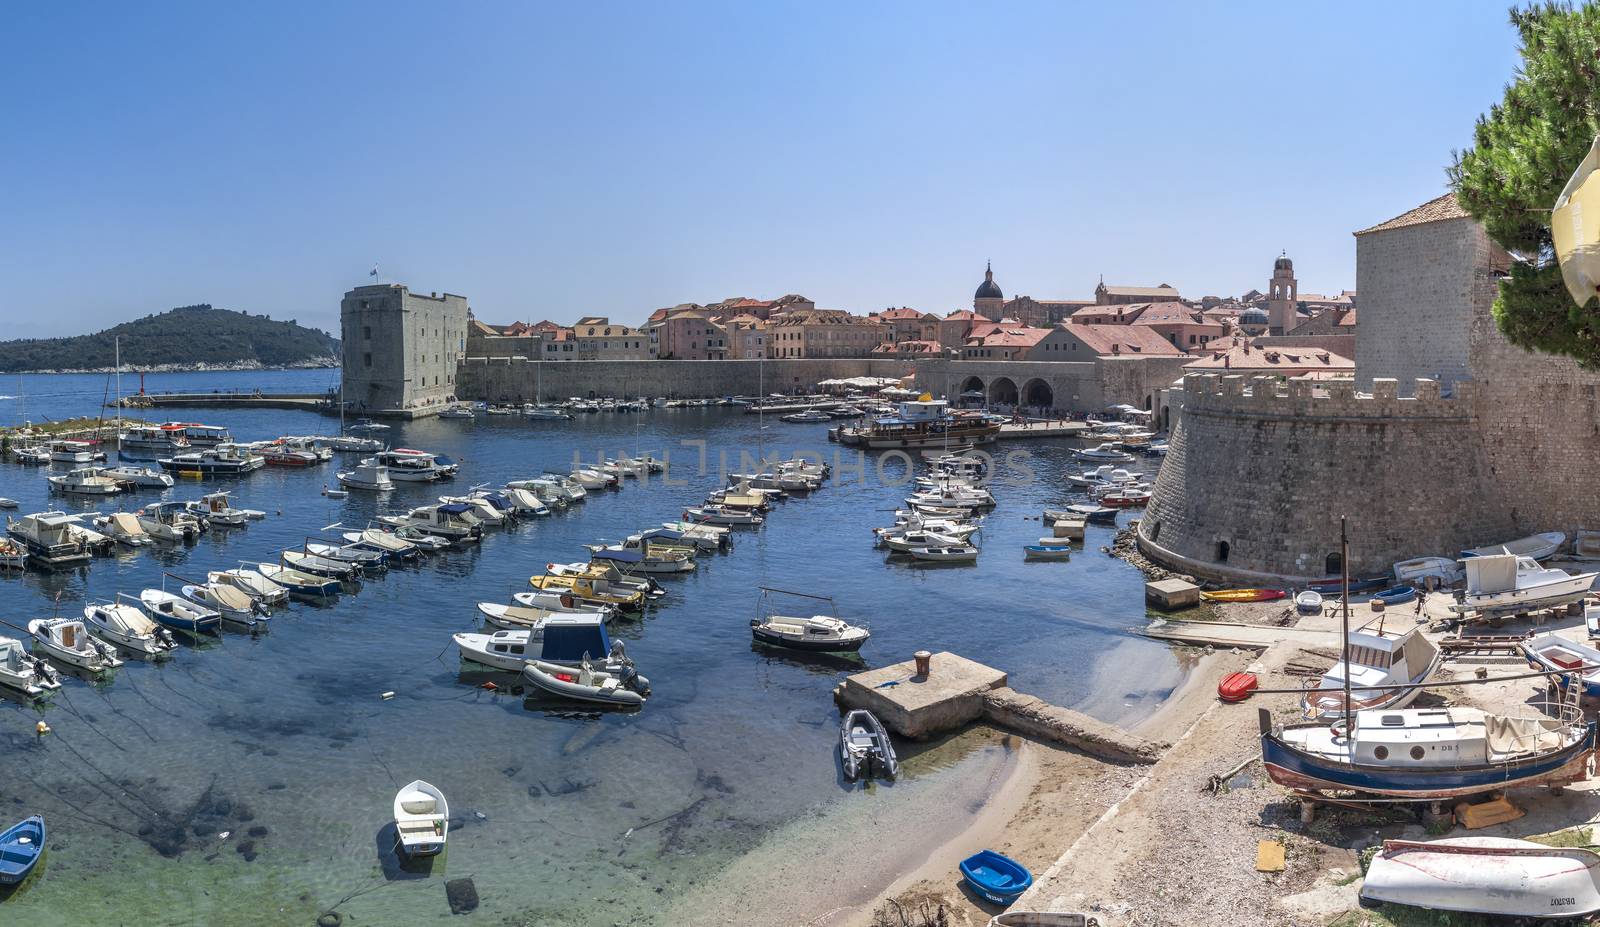 Dubrovnik, Croatia - 07. 13. 2018. Fort St. Ivana and Old Port in Dubrovnik, Croatia, panoramic view on a sunny summer day.